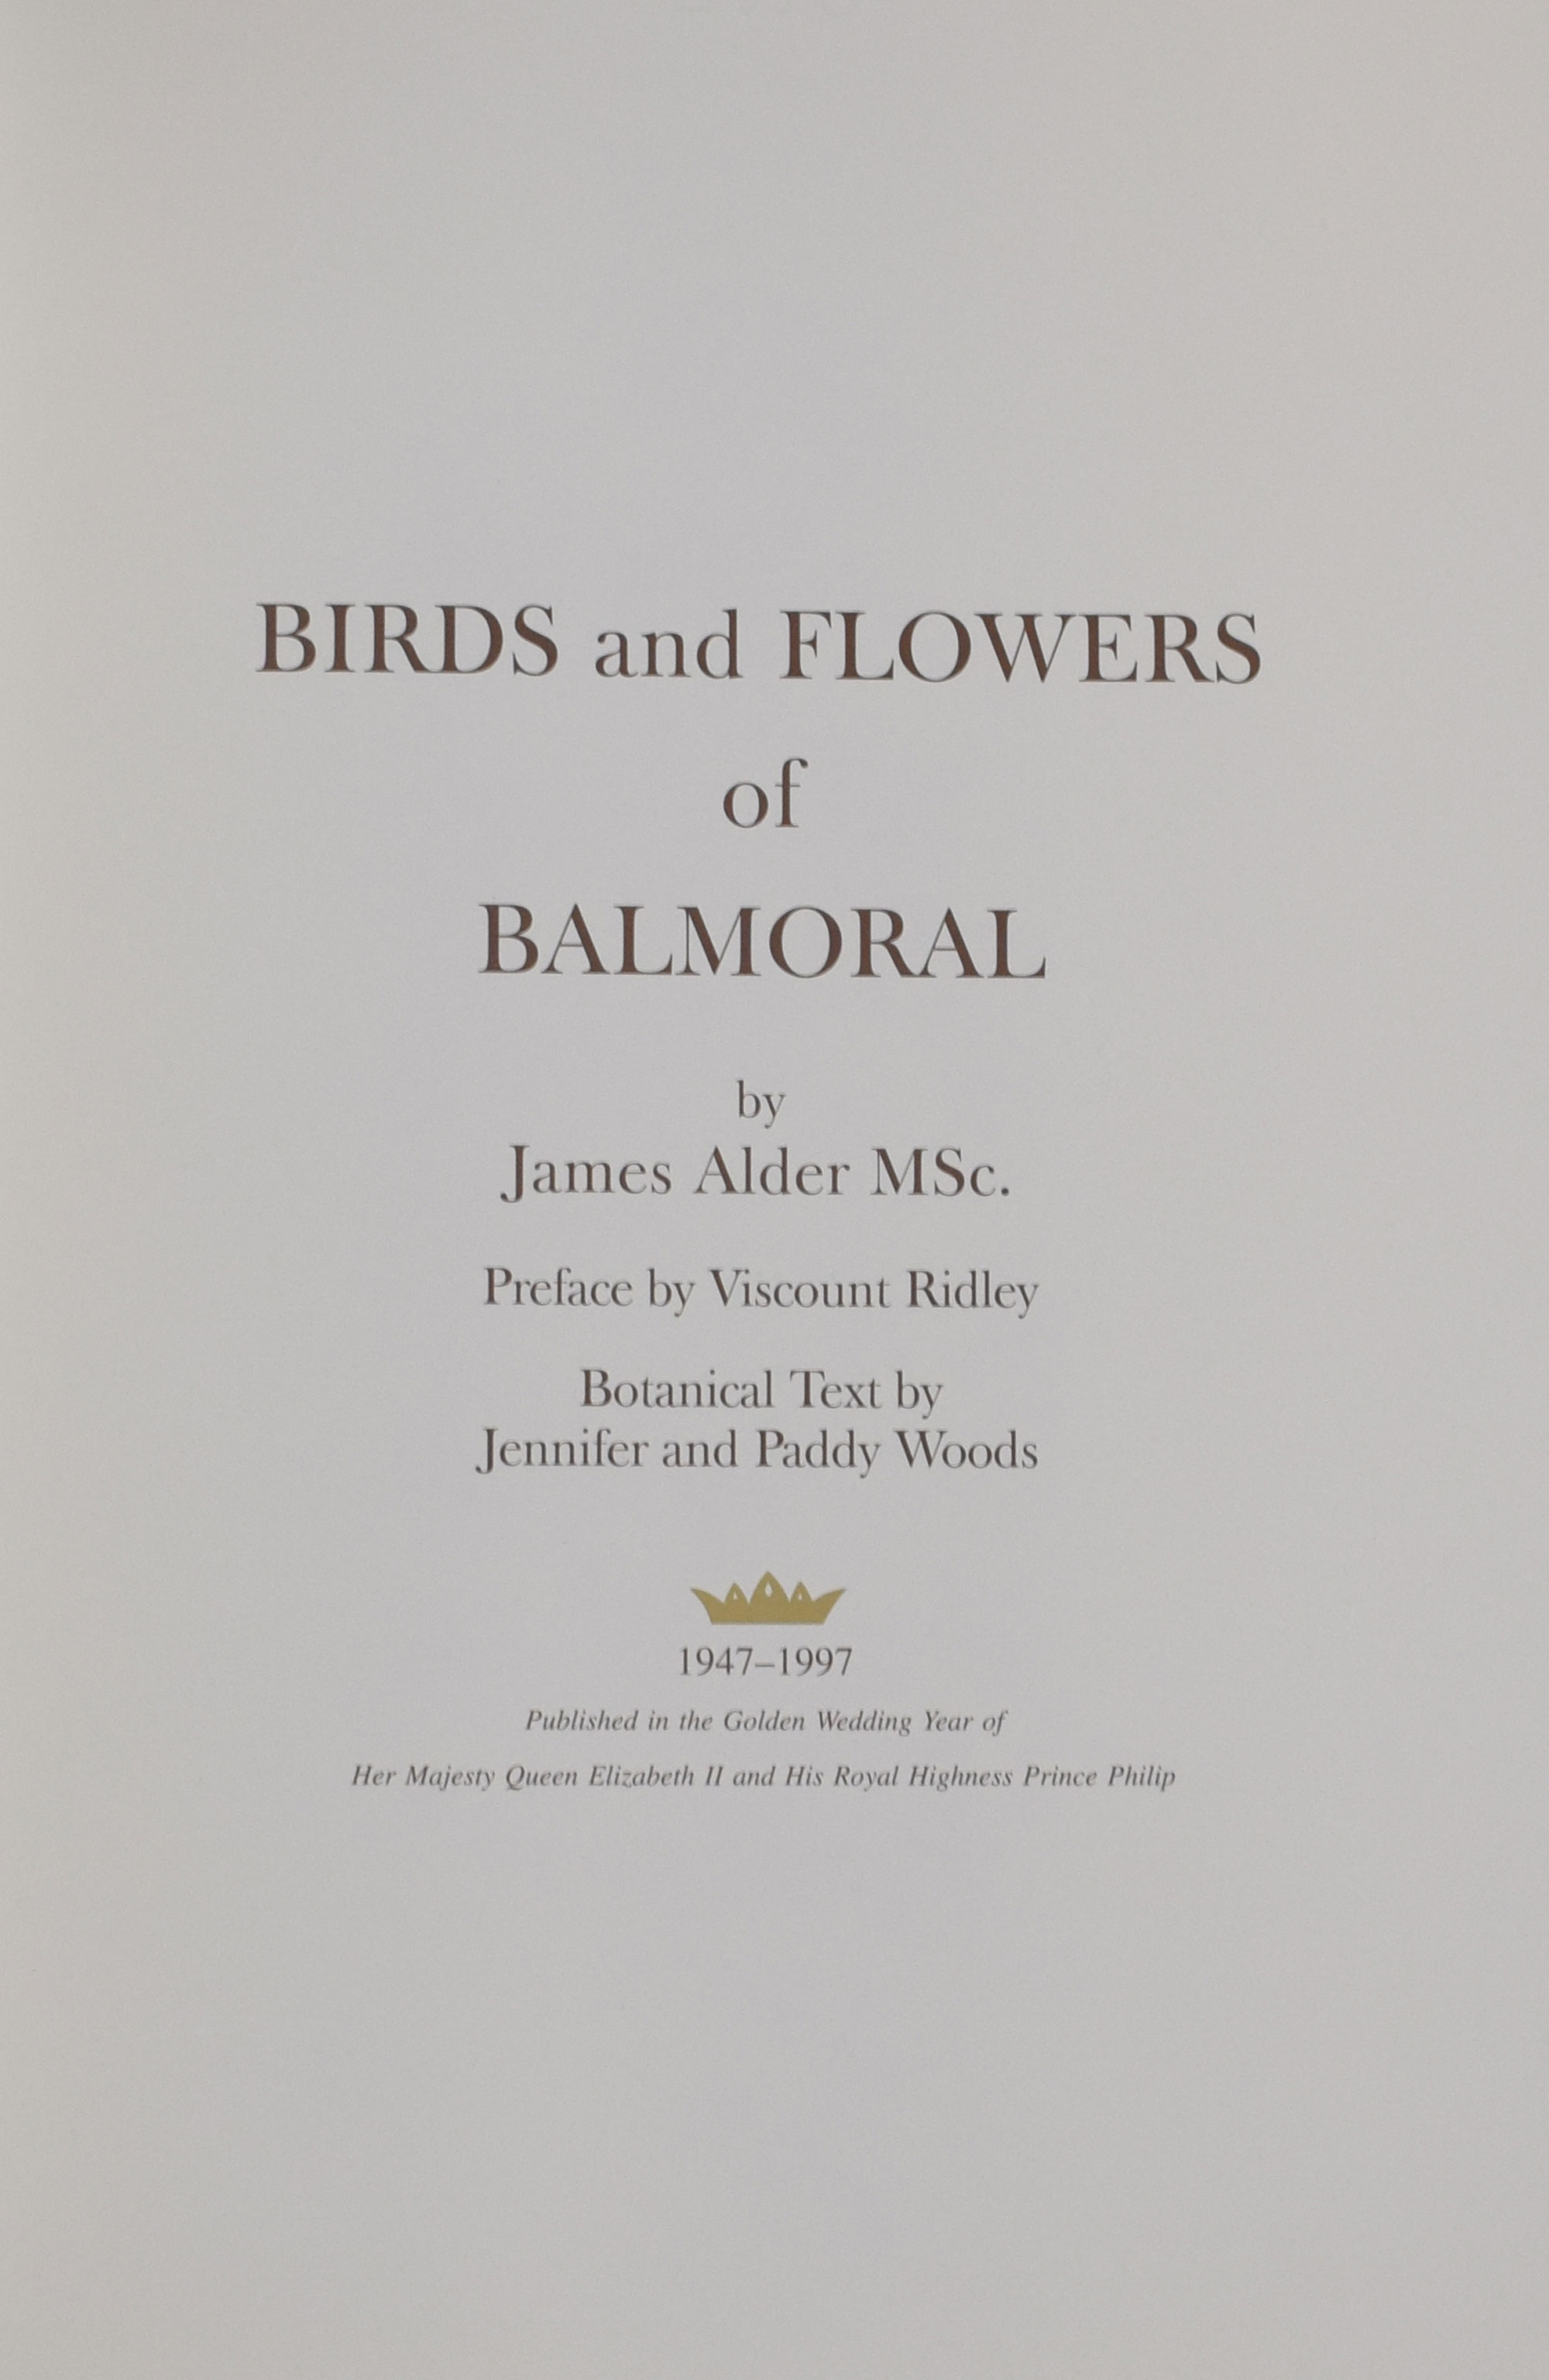 Birds and Flowers of Balmoral. Golden Wedding edition